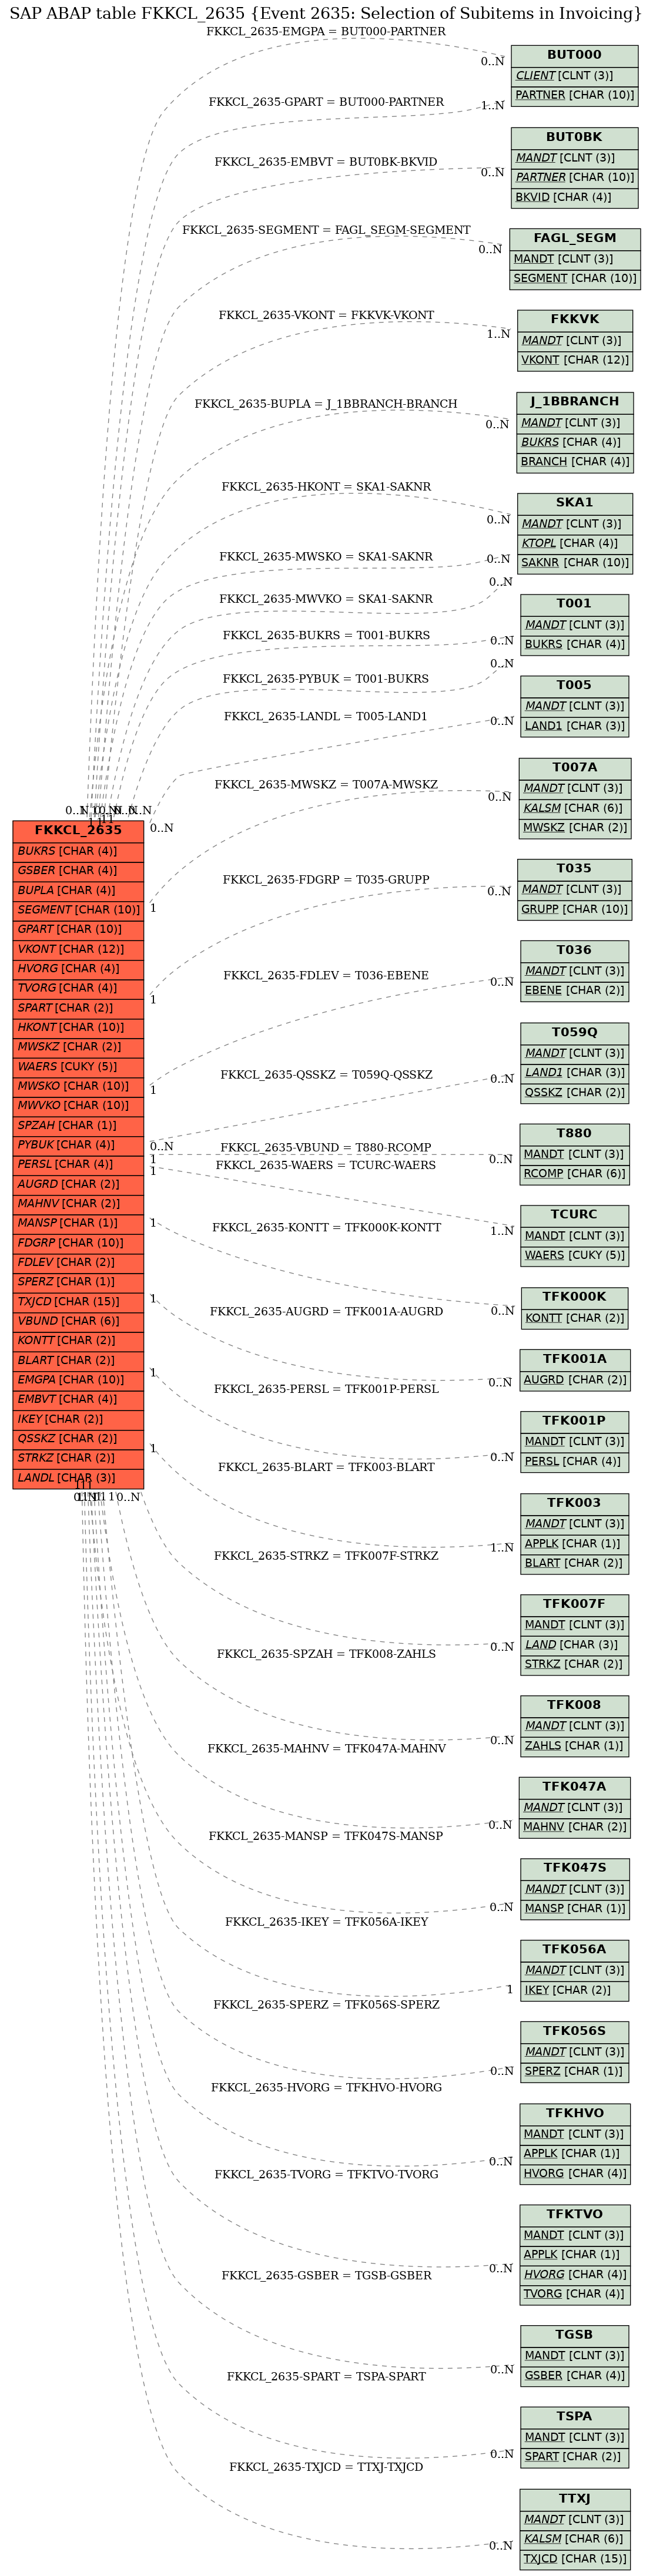 E-R Diagram for table FKKCL_2635 (Event 2635: Selection of Subitems in Invoicing)